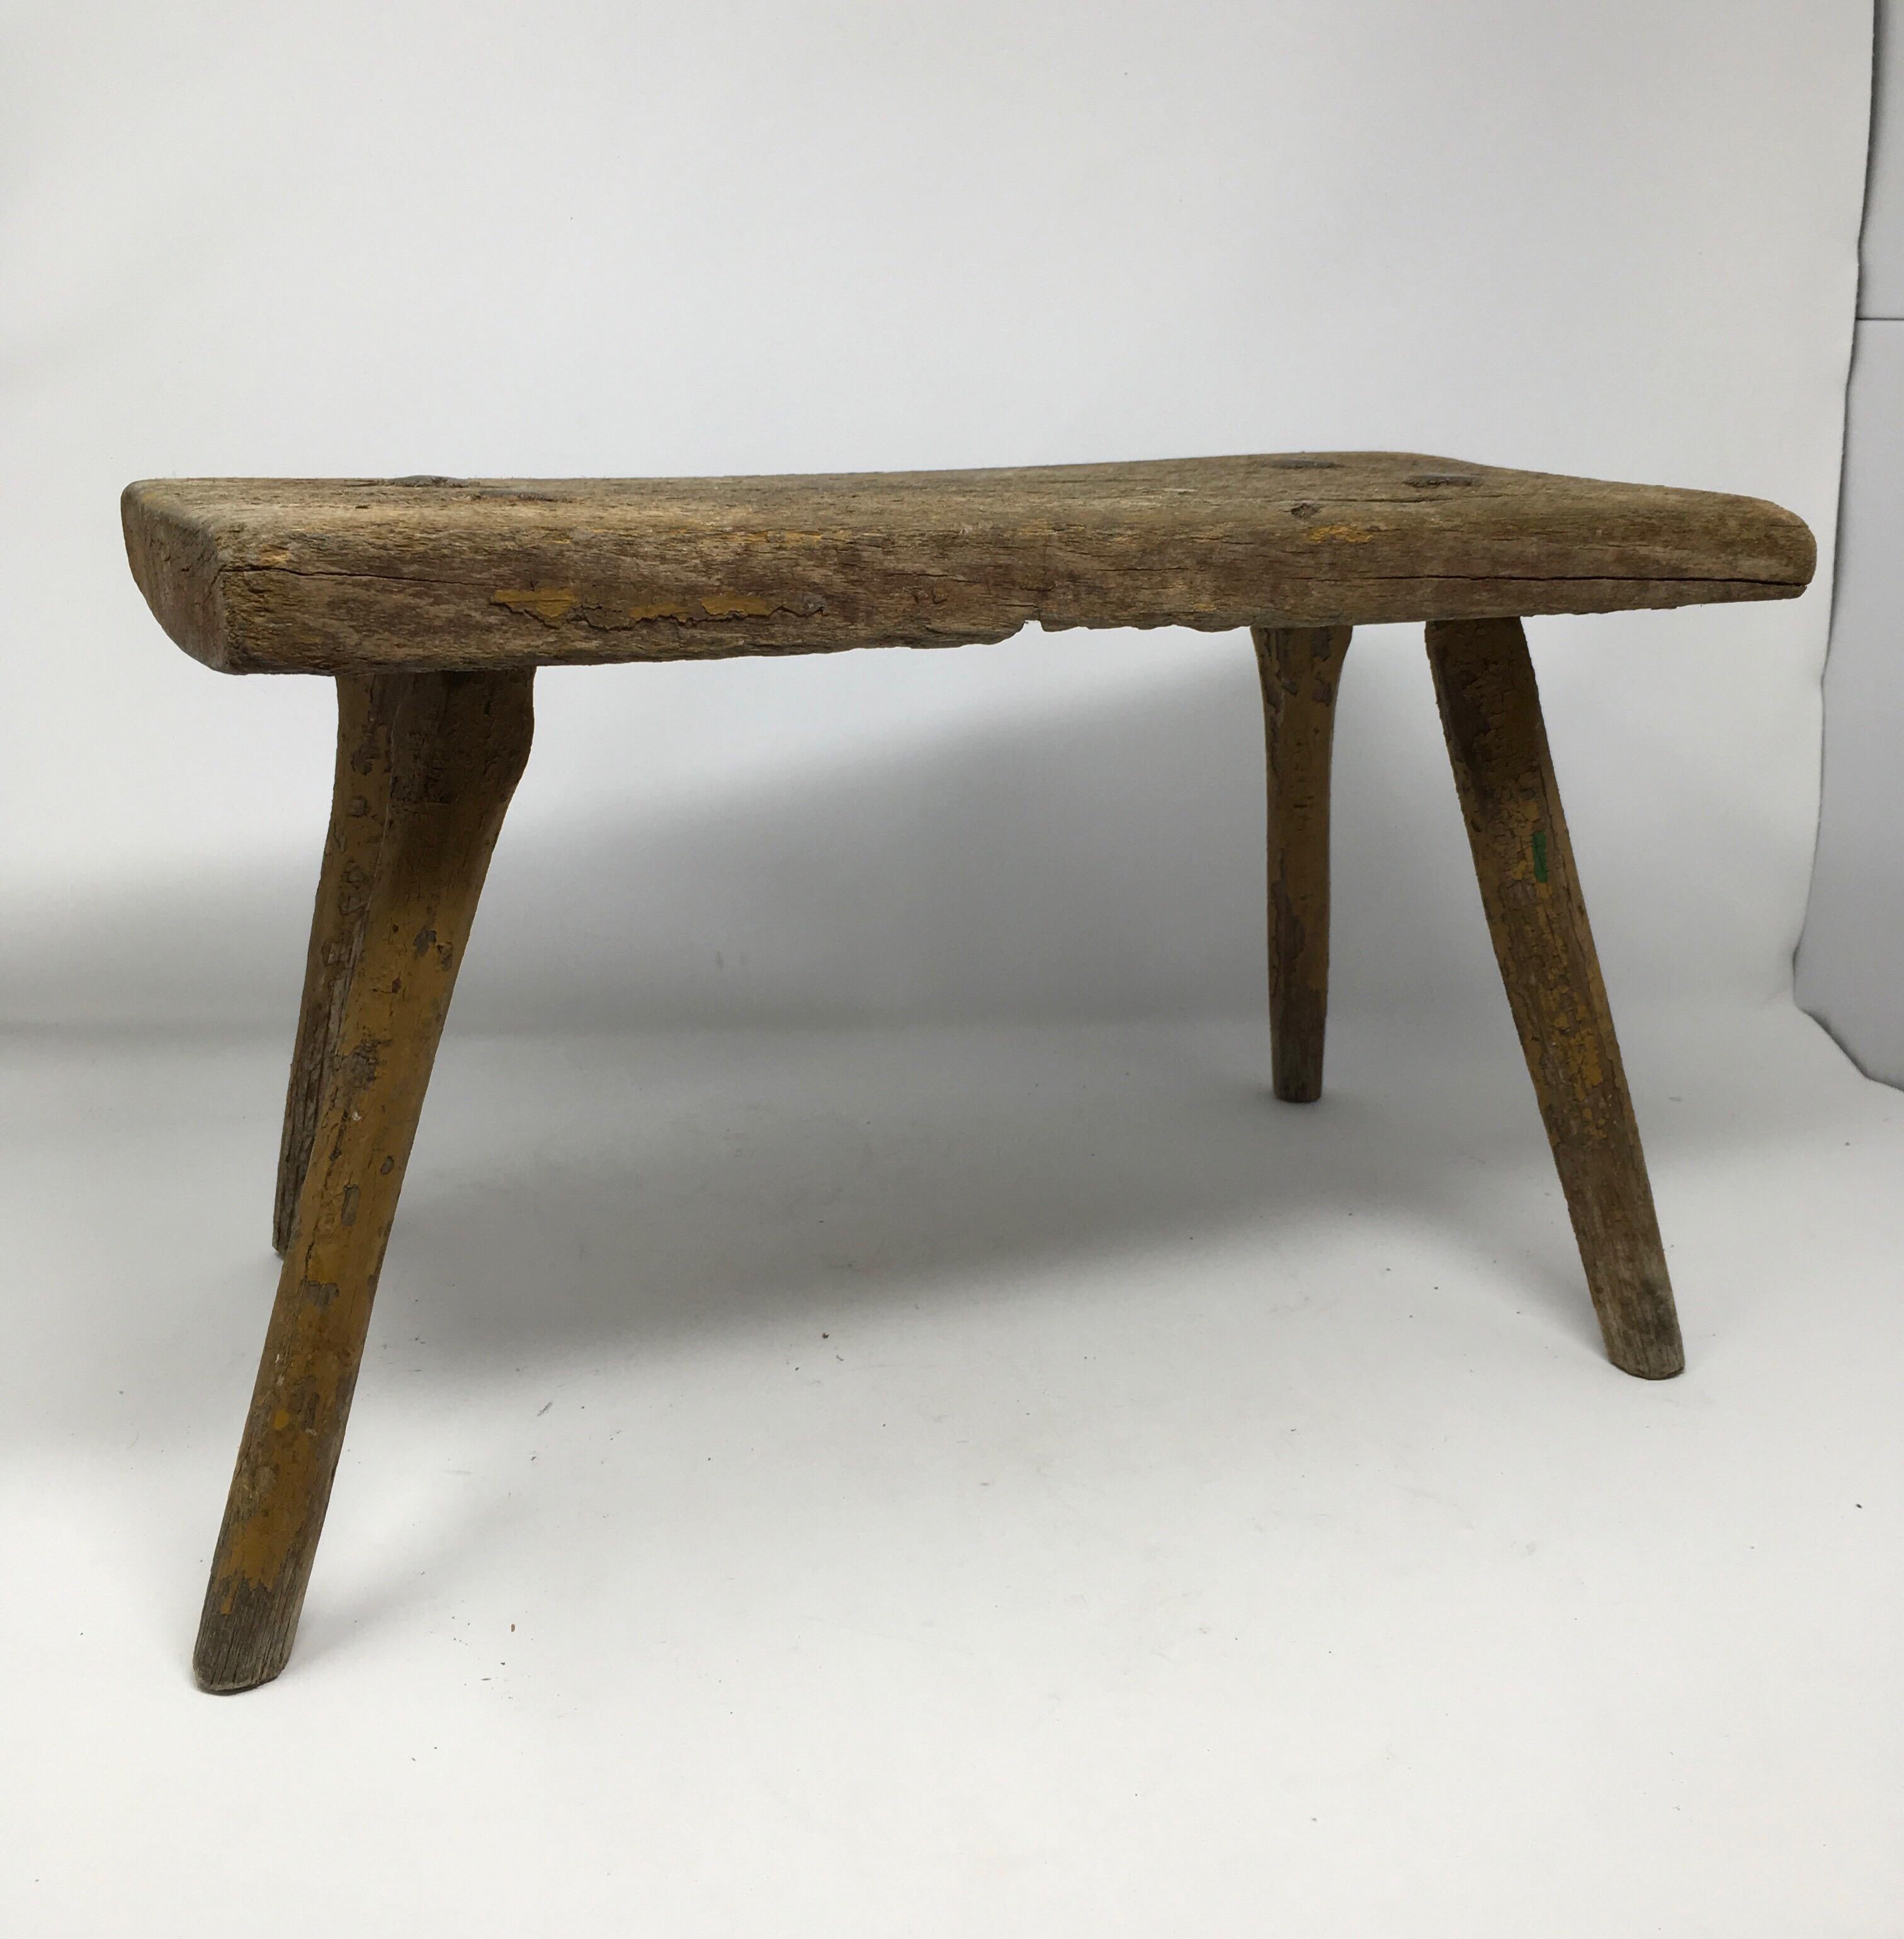 Found in the South of France, this antique French milking stool with aged patina and traces of original paint is made of solid hardwood and set on four hand hewn spindled legs. With its rustic charm, these types of milking stools can serve as a